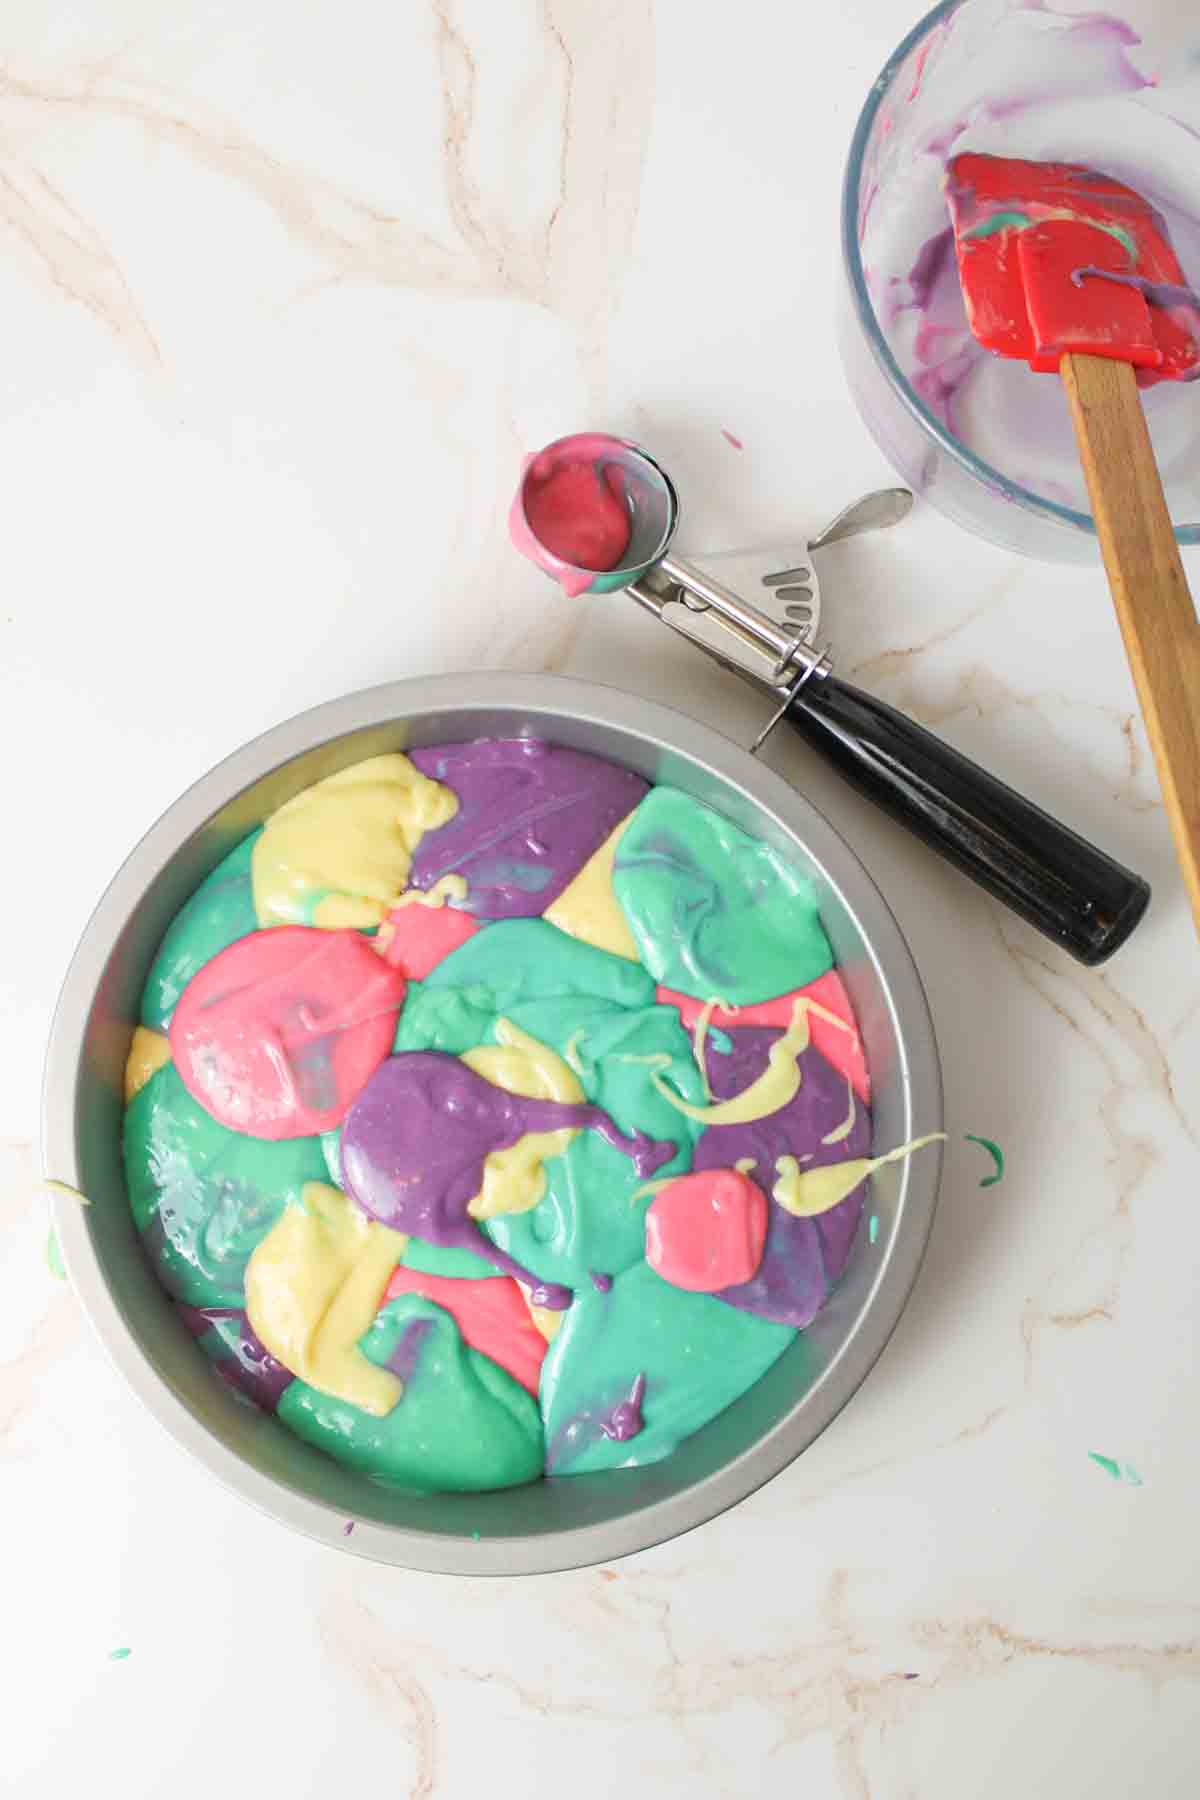 a filled cake pan of colorful splashes of pastel cake batter